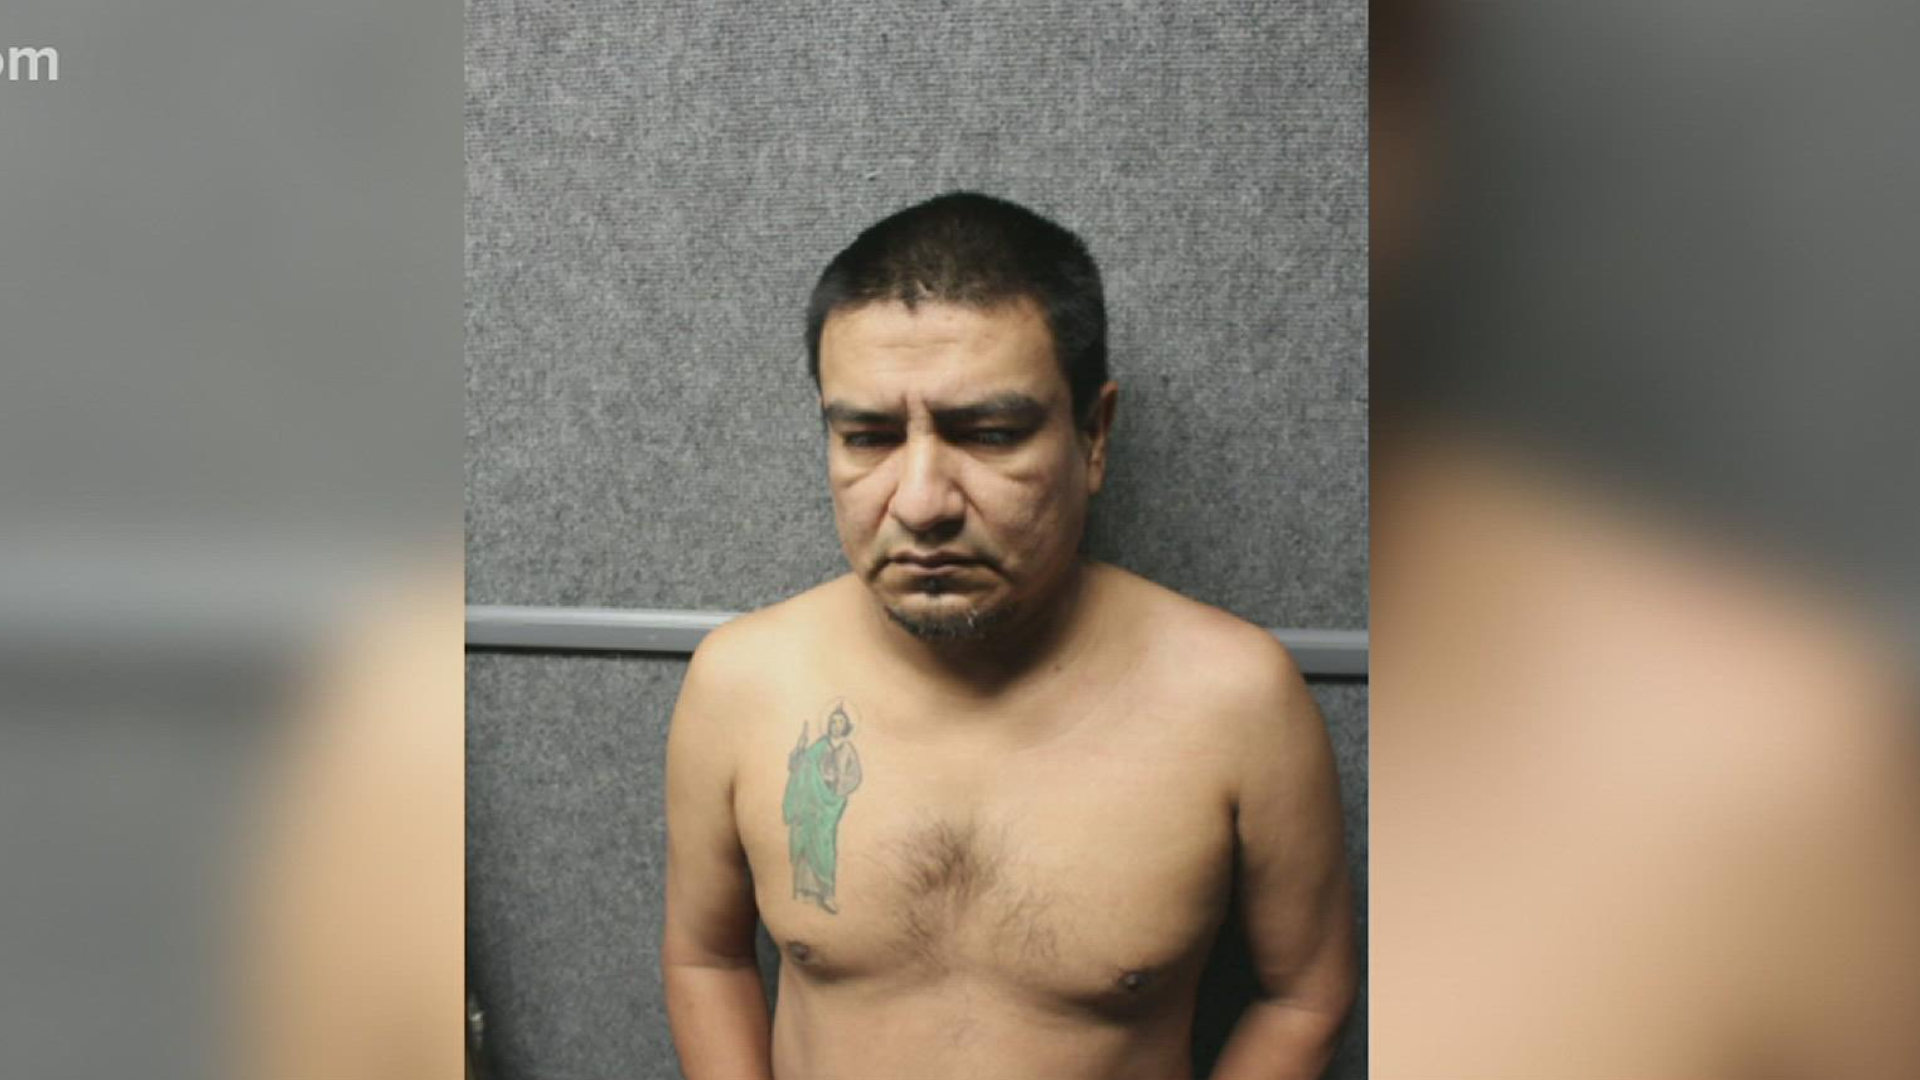 Adrian Martinez, dubbed the 'Grim Reaper Rapist' due to a tattoo he has, was matched to DNA from at least two rapes in Aransas Pass and one rape case in Houston.